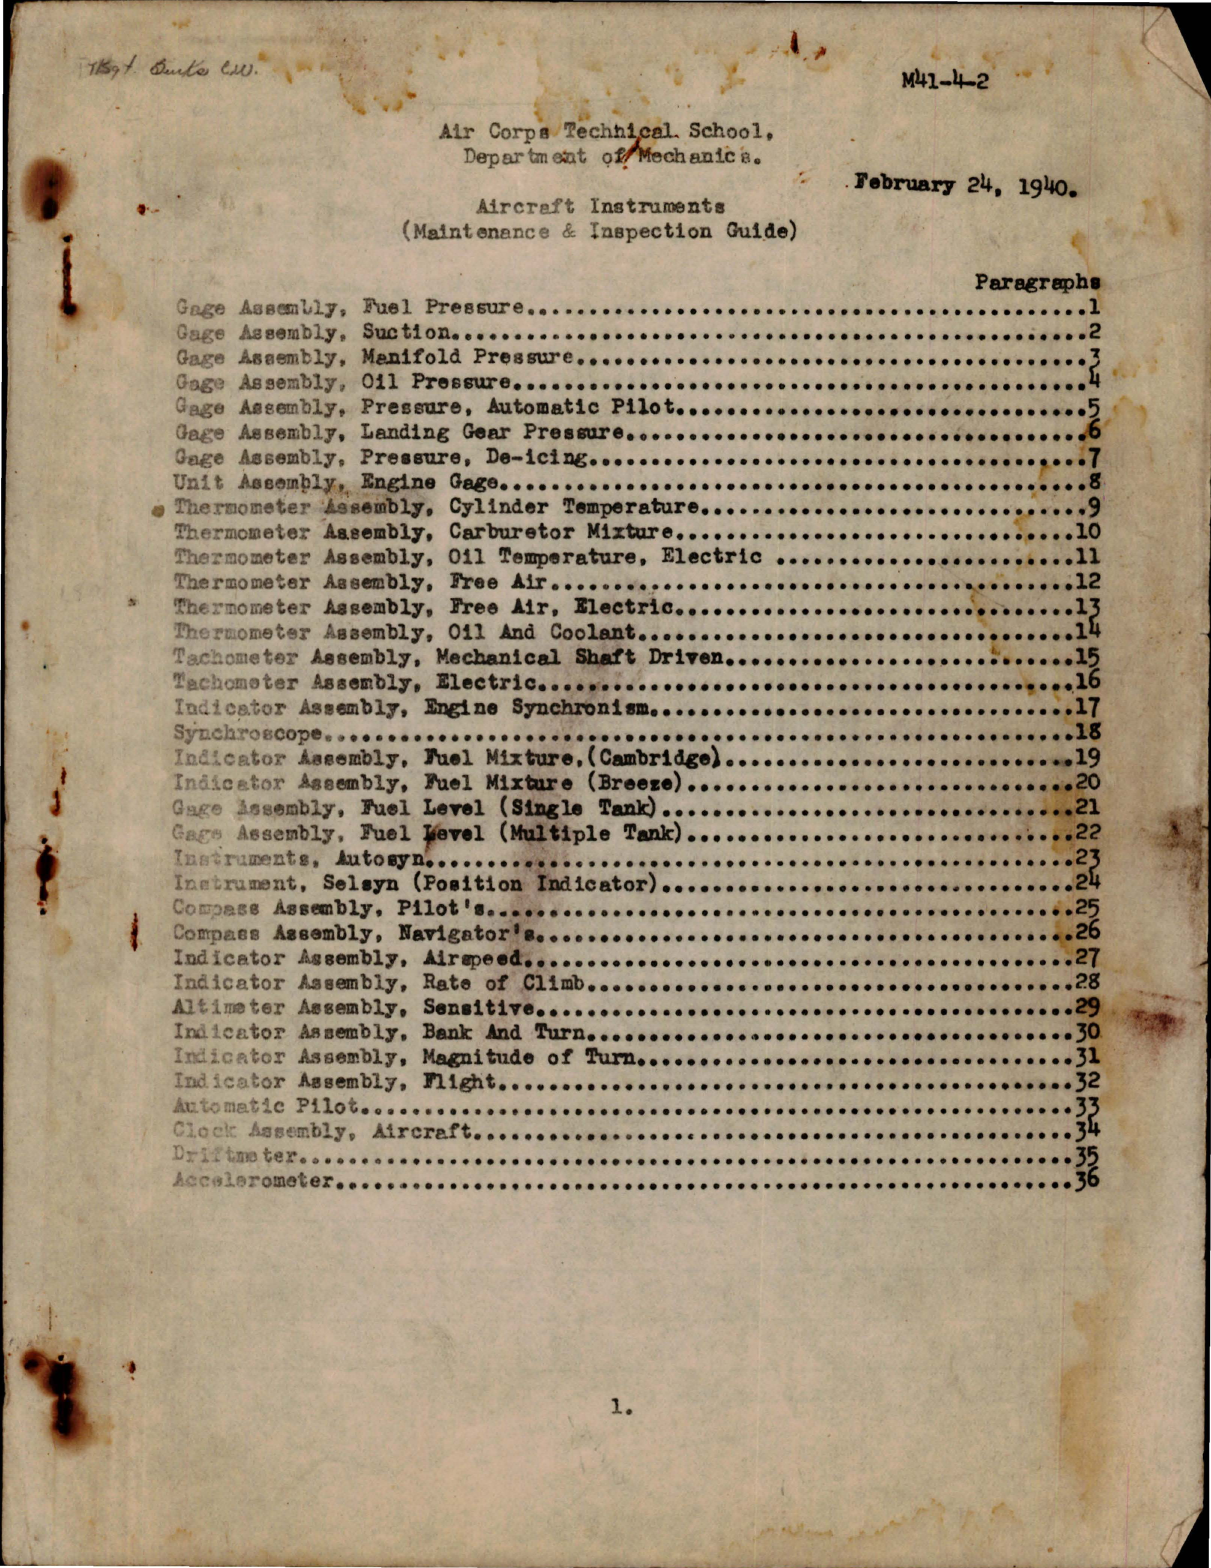 Sample page 1 from AirCorps Library document: Air Corps Technical School - Inspection Guide for Aircraft Instruments